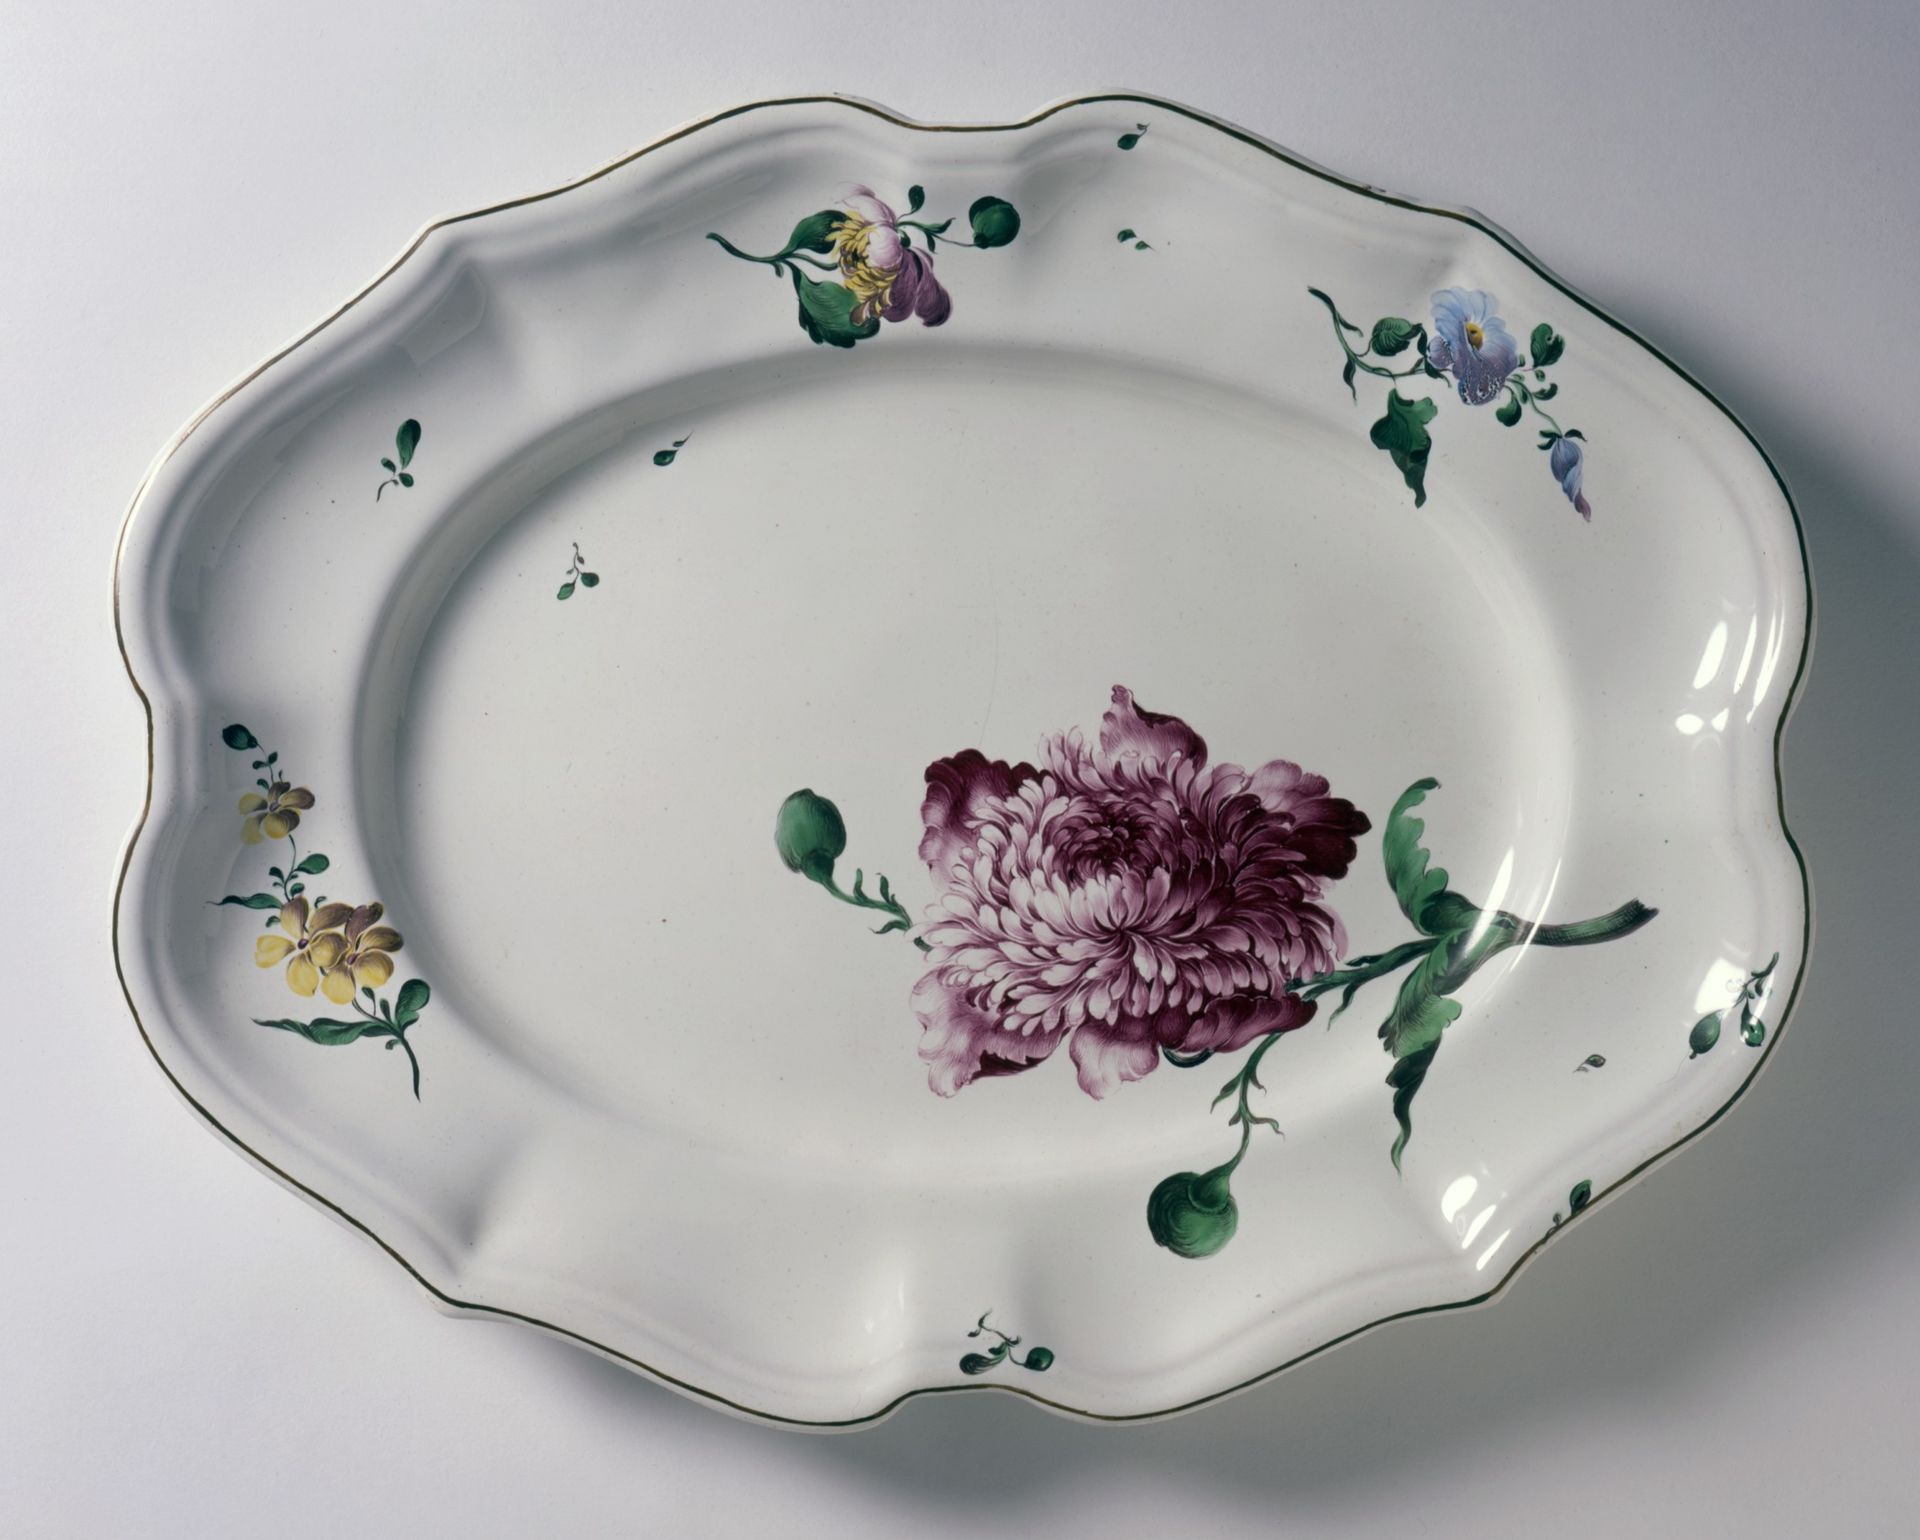 Platter with Peony produced by the Hannongs, 1765